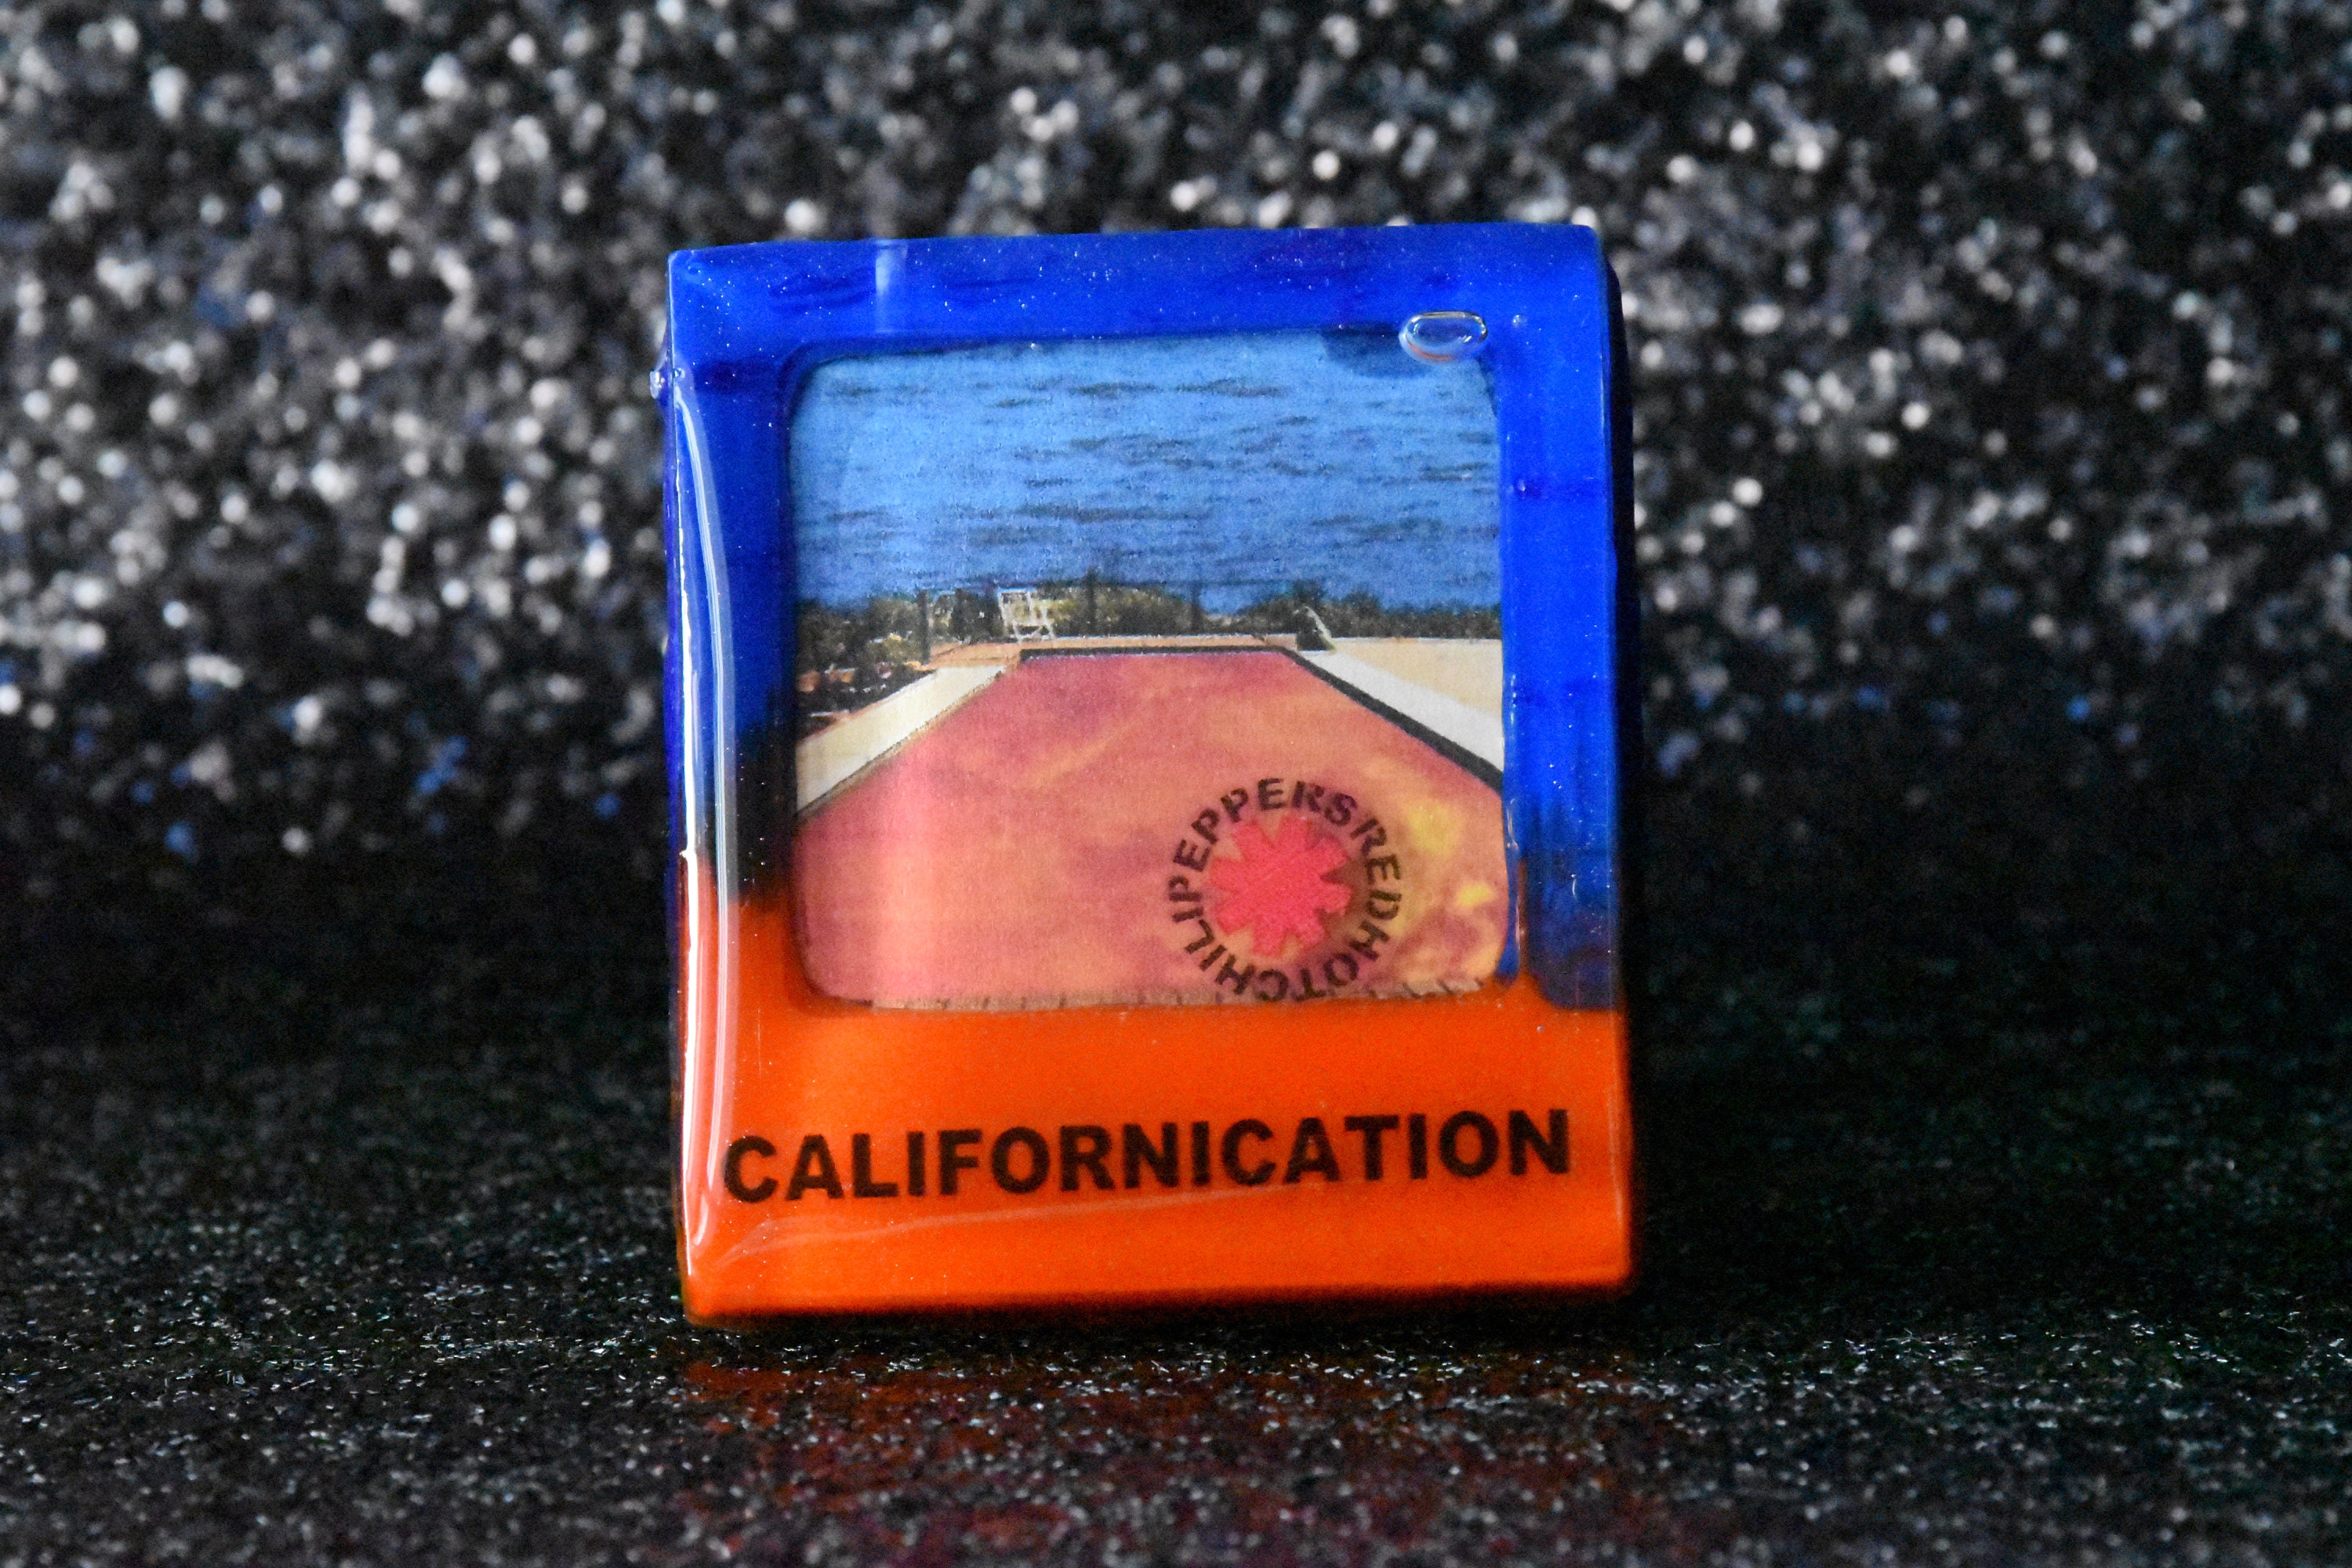 Californication Red Hot Chili Peppers Album Aimant Shaker